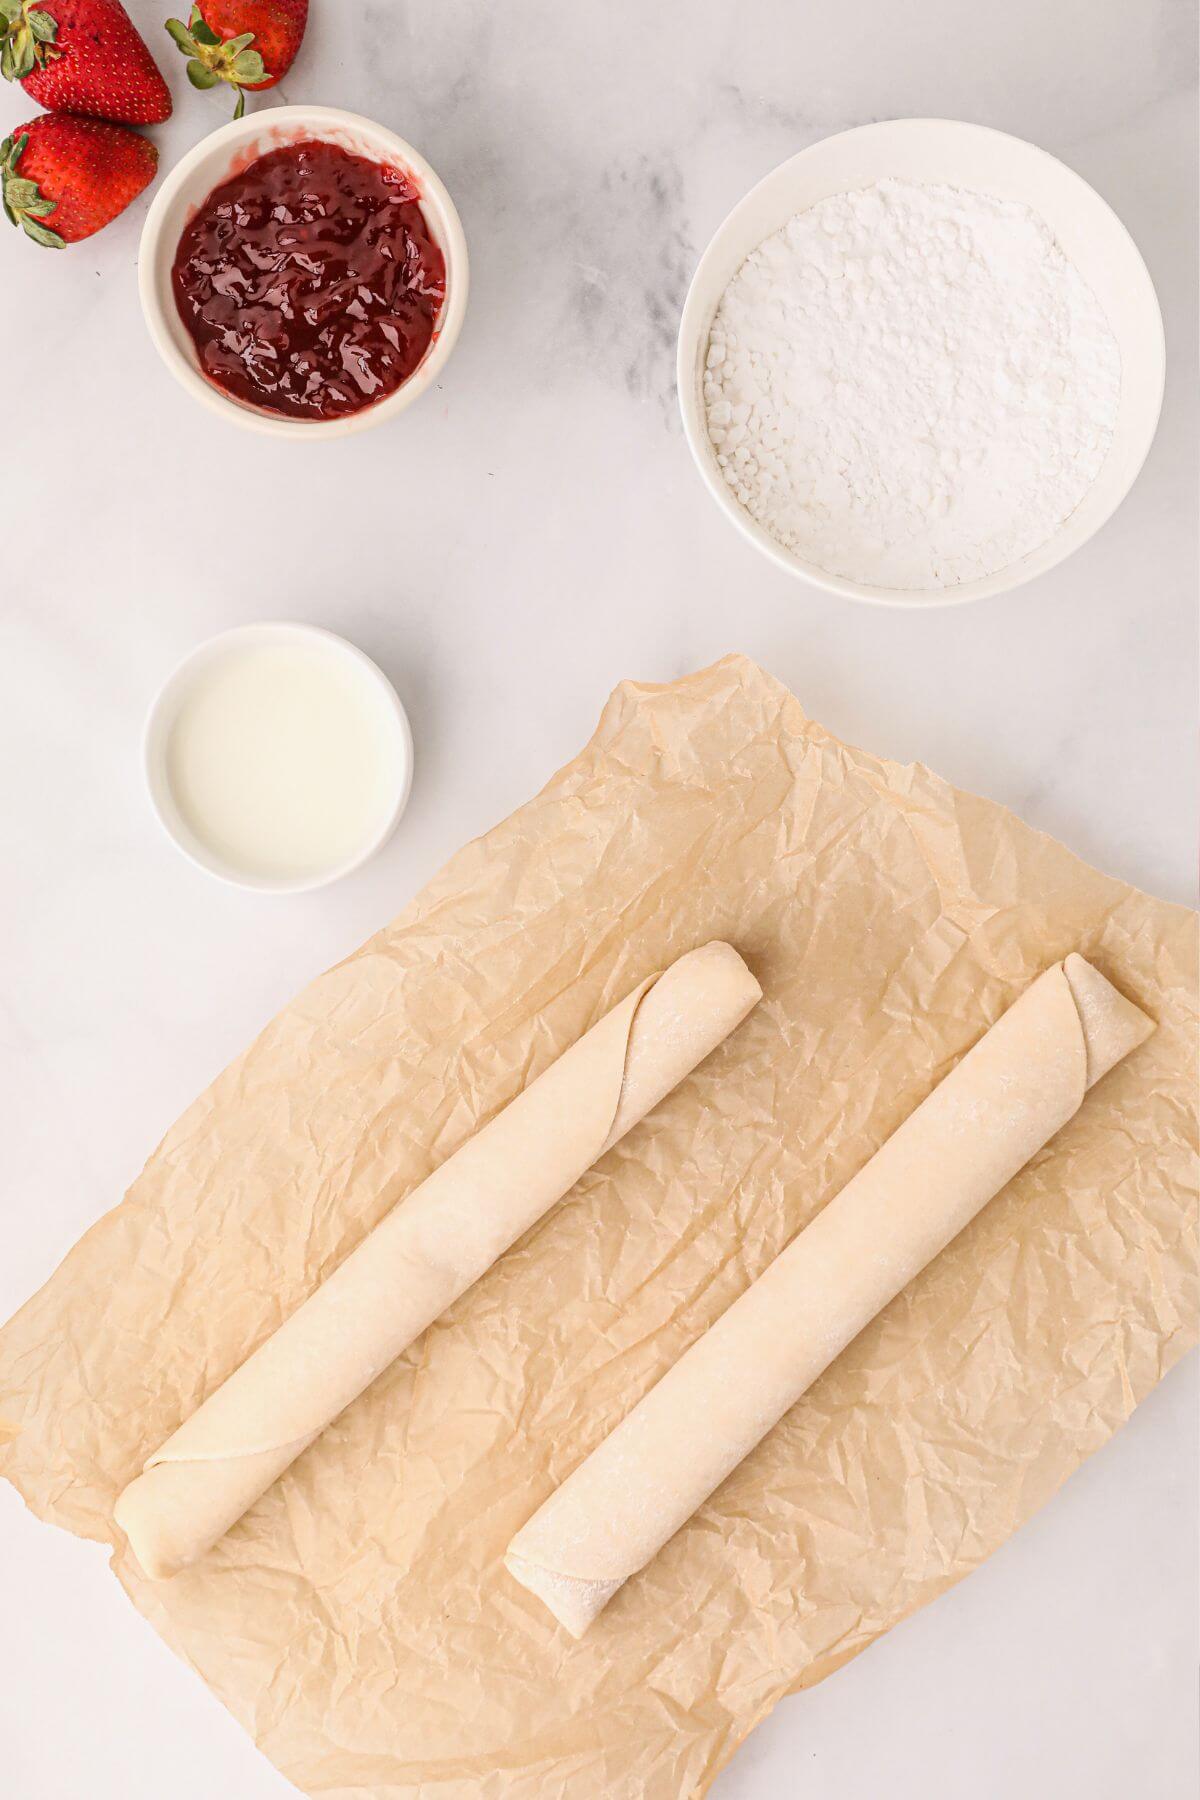 Ingredients needed to make pop tarts, crust, jam filling, powdered sugar and milk for the glaze. 